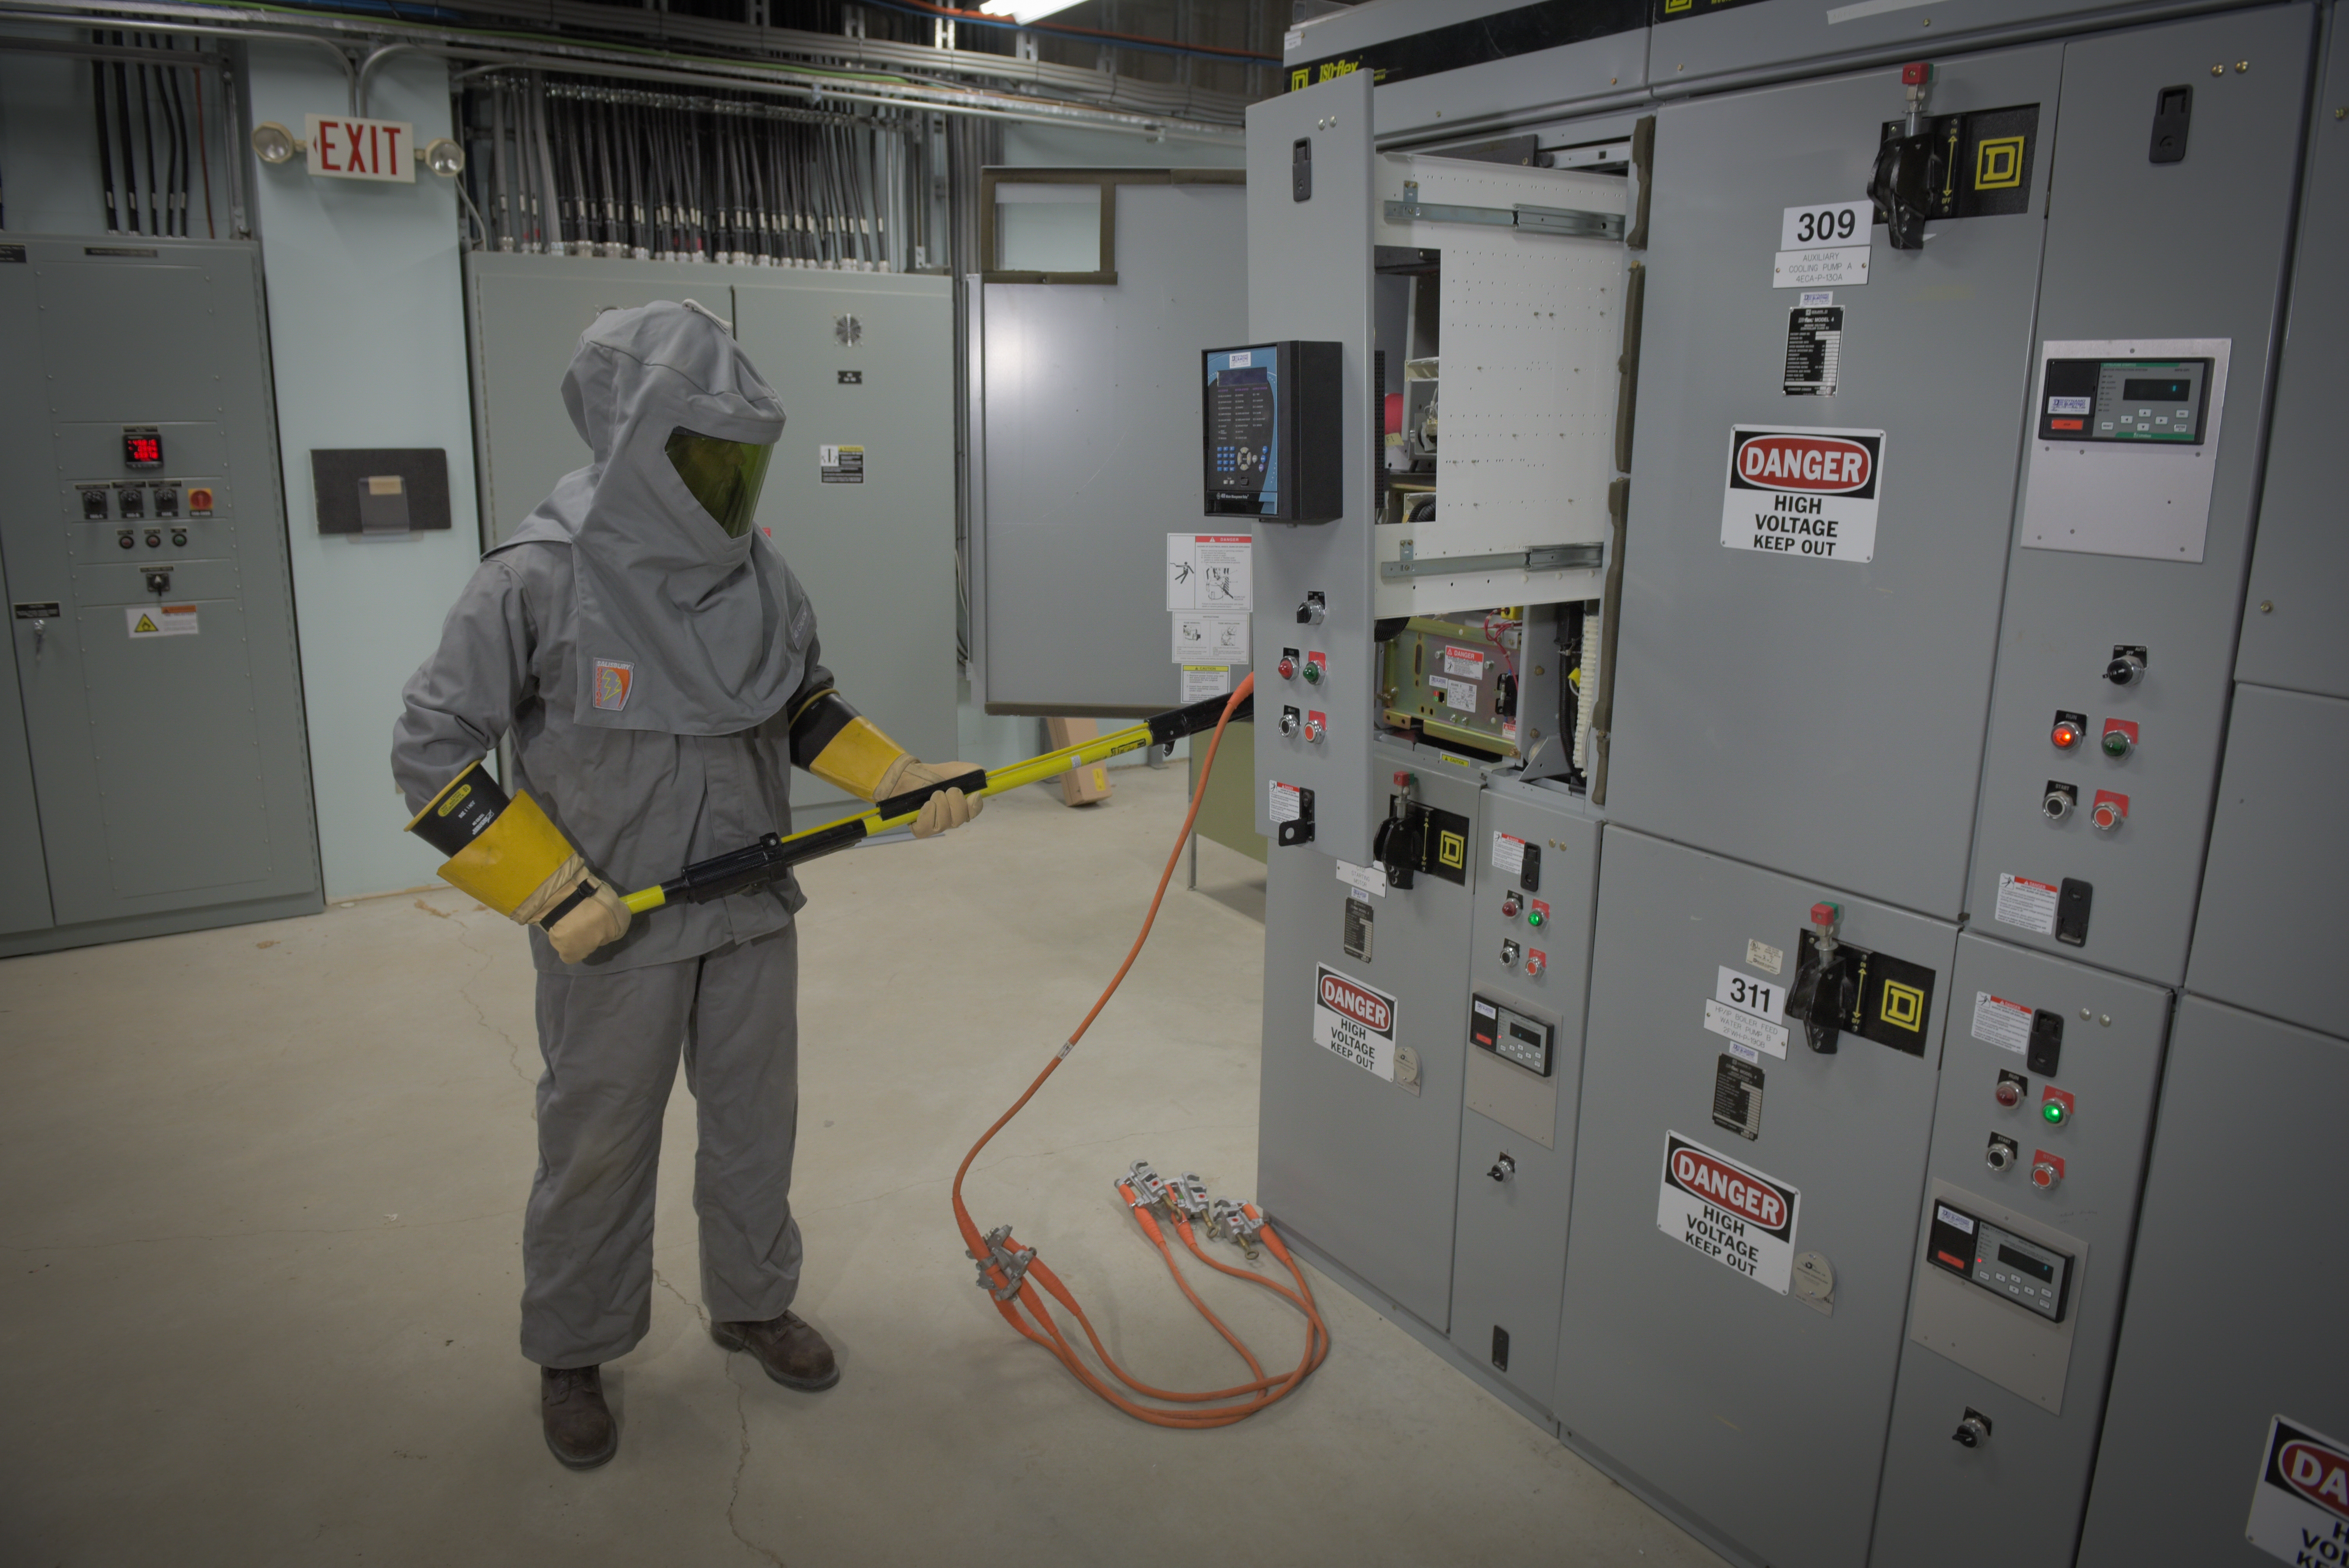 Dynamo employee using High voltage hot stick to minimize risk to person and equipment. The employee is in full protective arc flash suit.